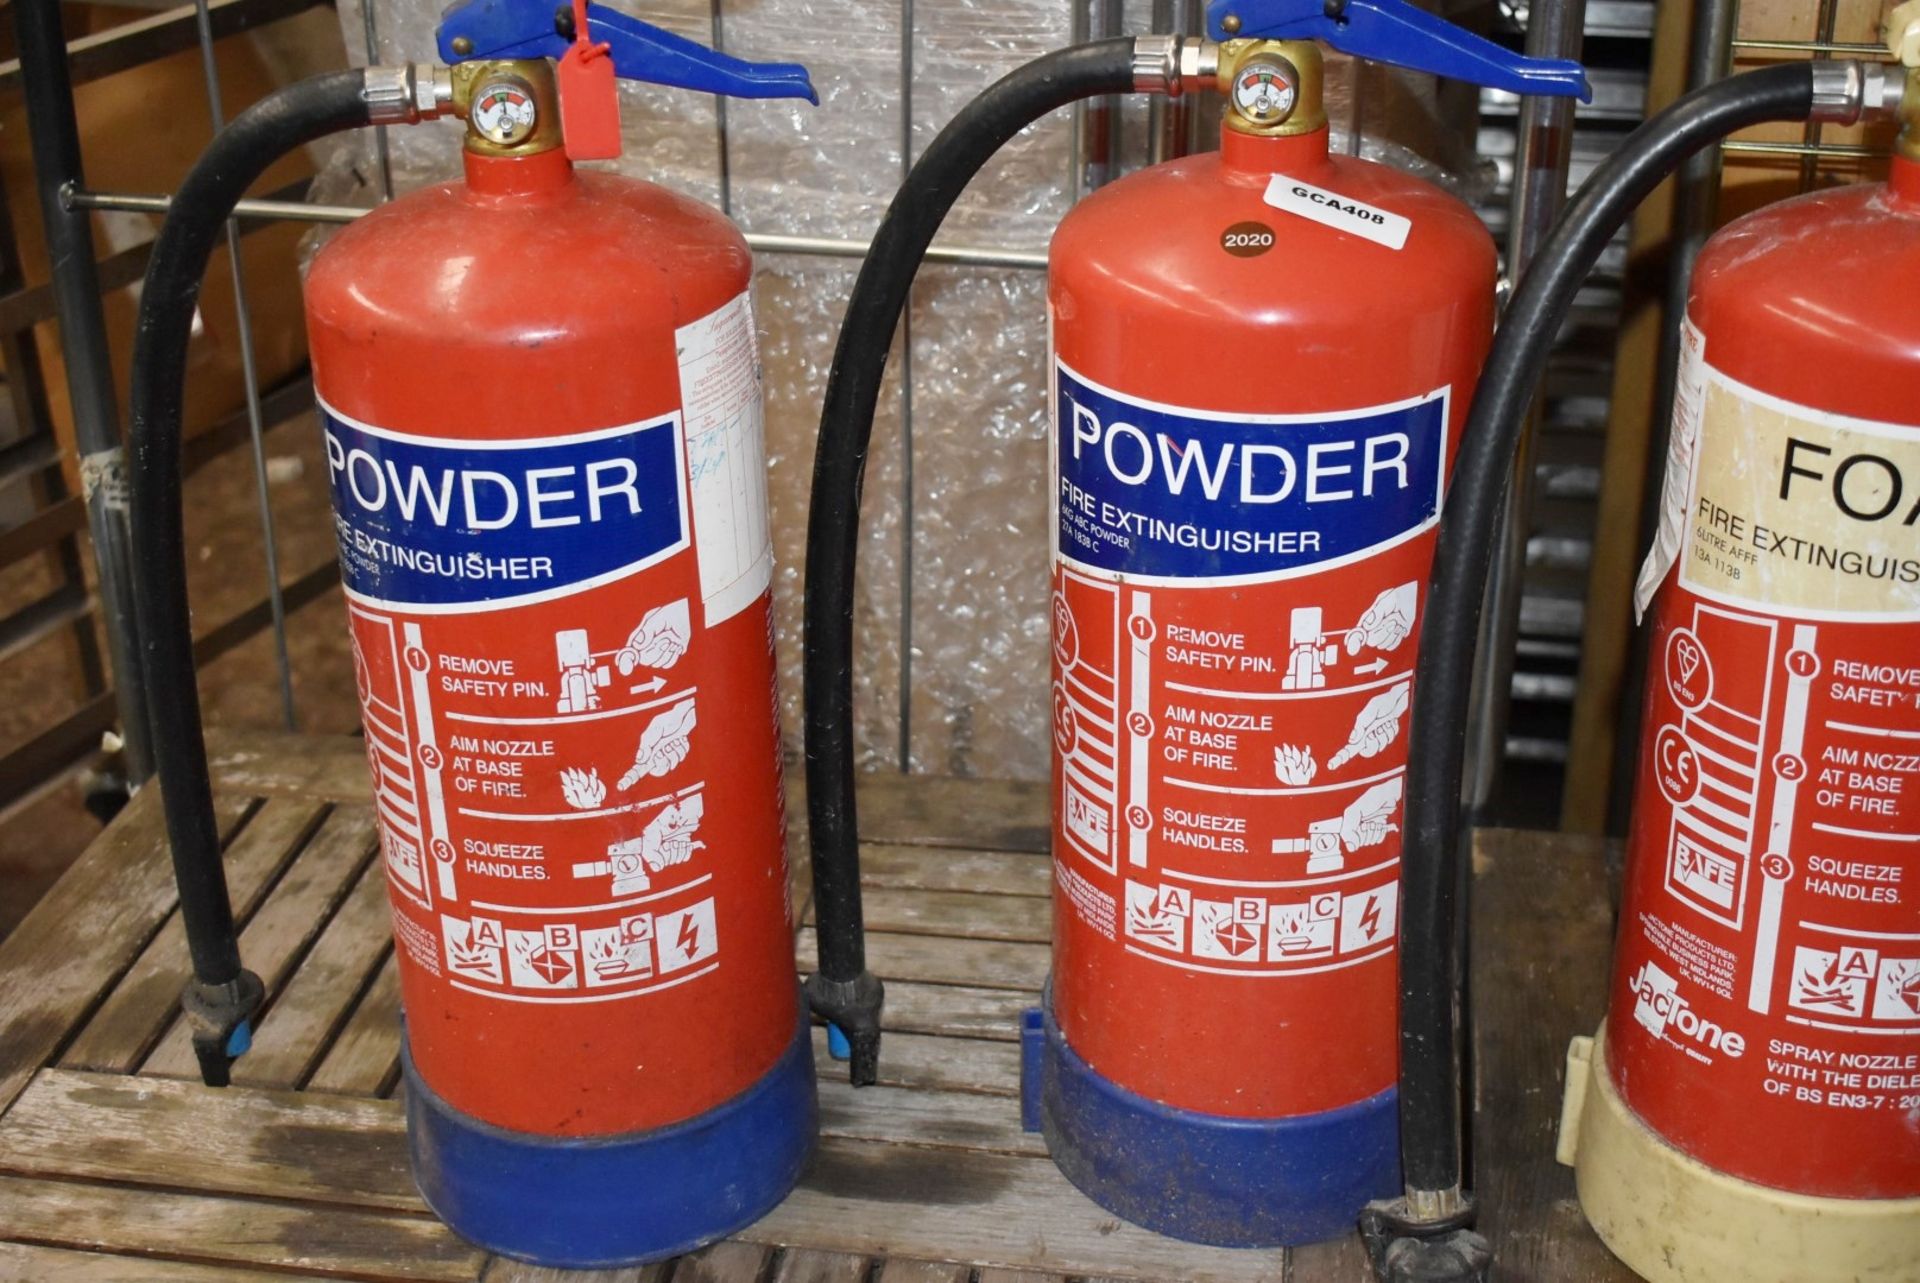 4 x Various Fire Extinguishers - Includes Power, Foam and Wet Chemical - CL011 - Ref: GCA408 WH5 - - Image 2 of 4